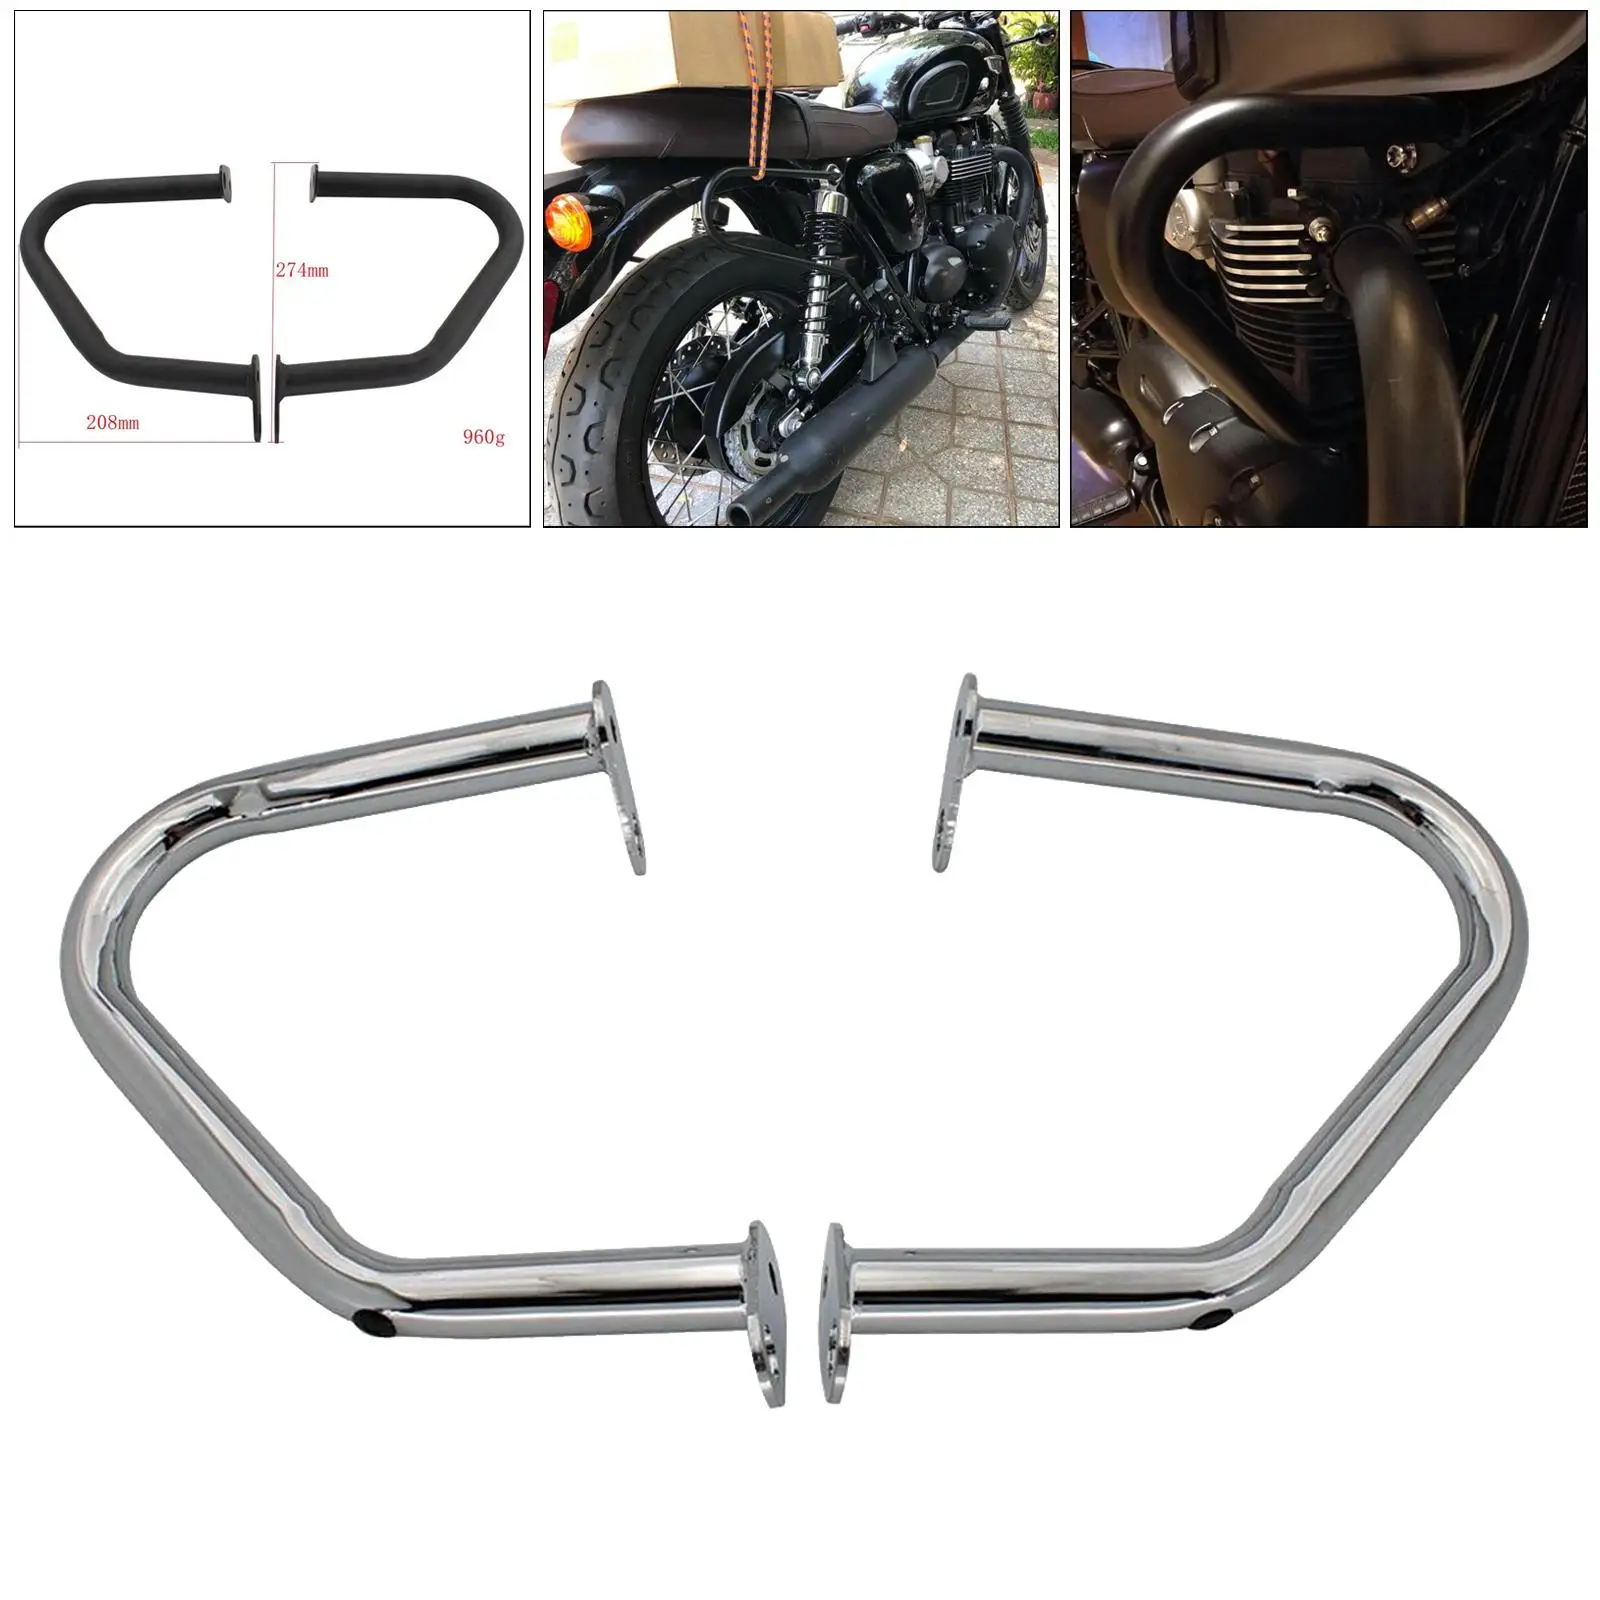 2pcs Motorcycle Bumper Engine Guard Frame Protector for 